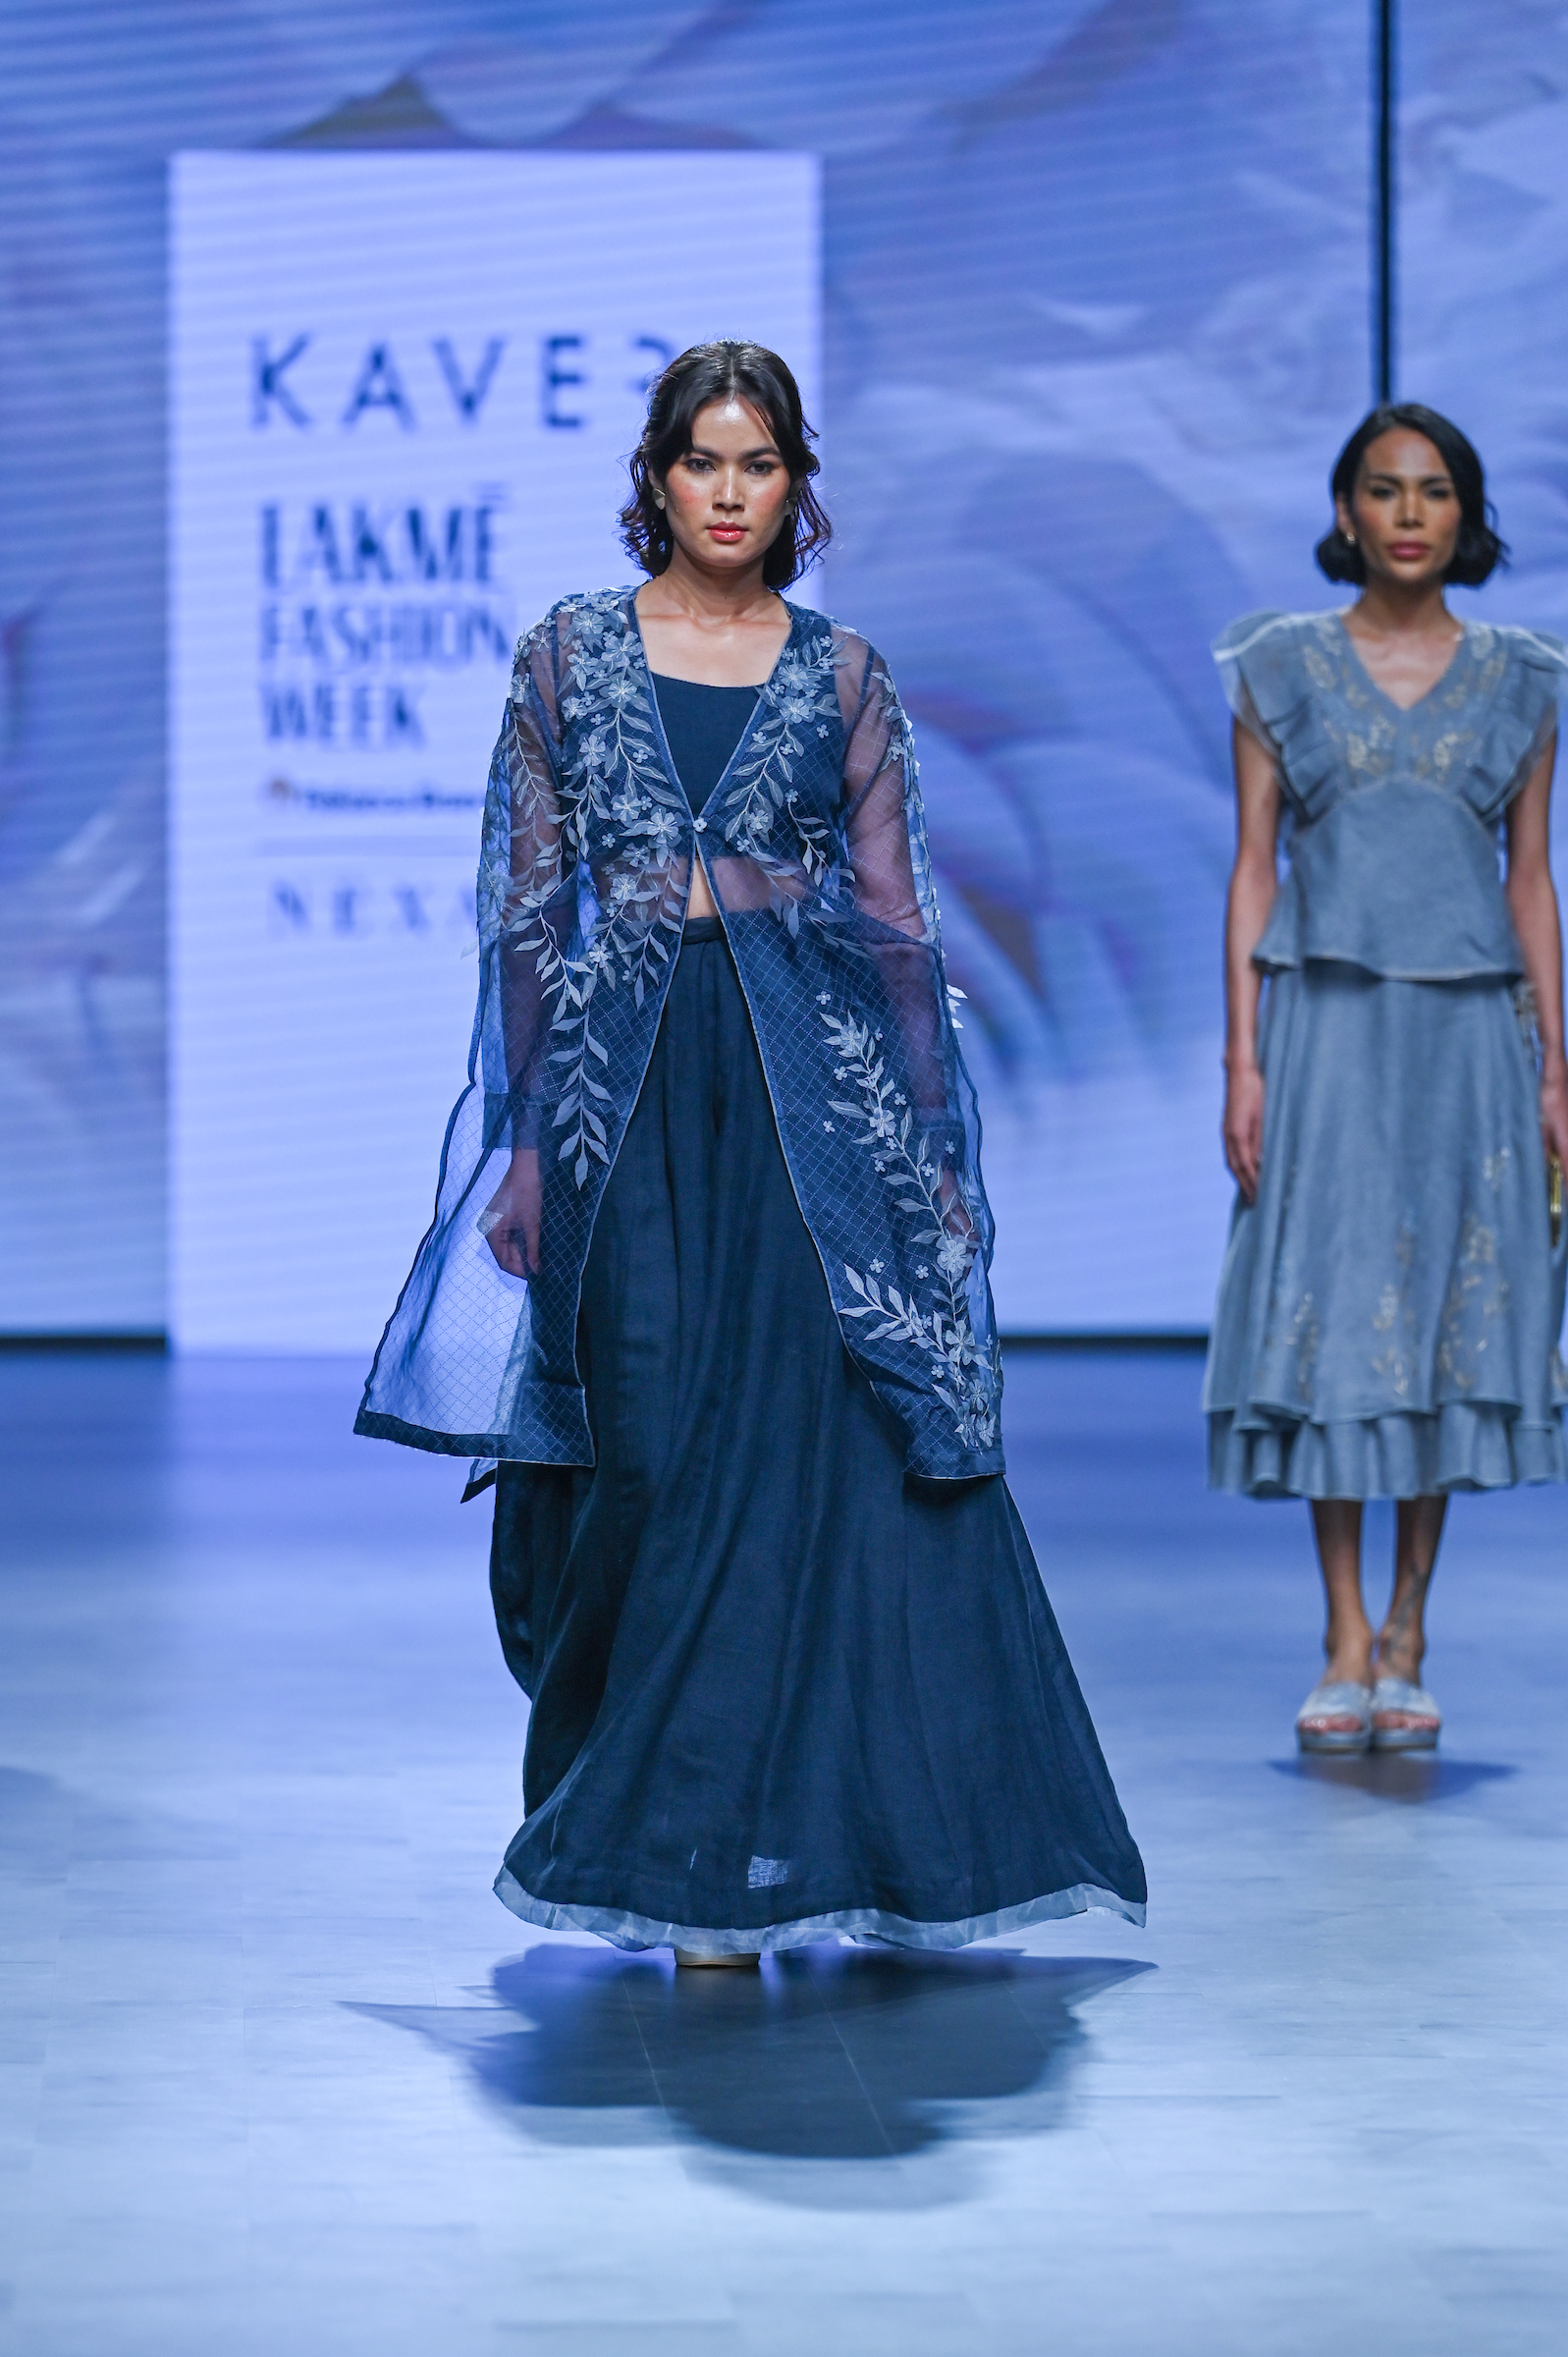 A model presenting Kaveri's “The Romance of the Rose” collection at Lakmé Fashion Week x FDCI